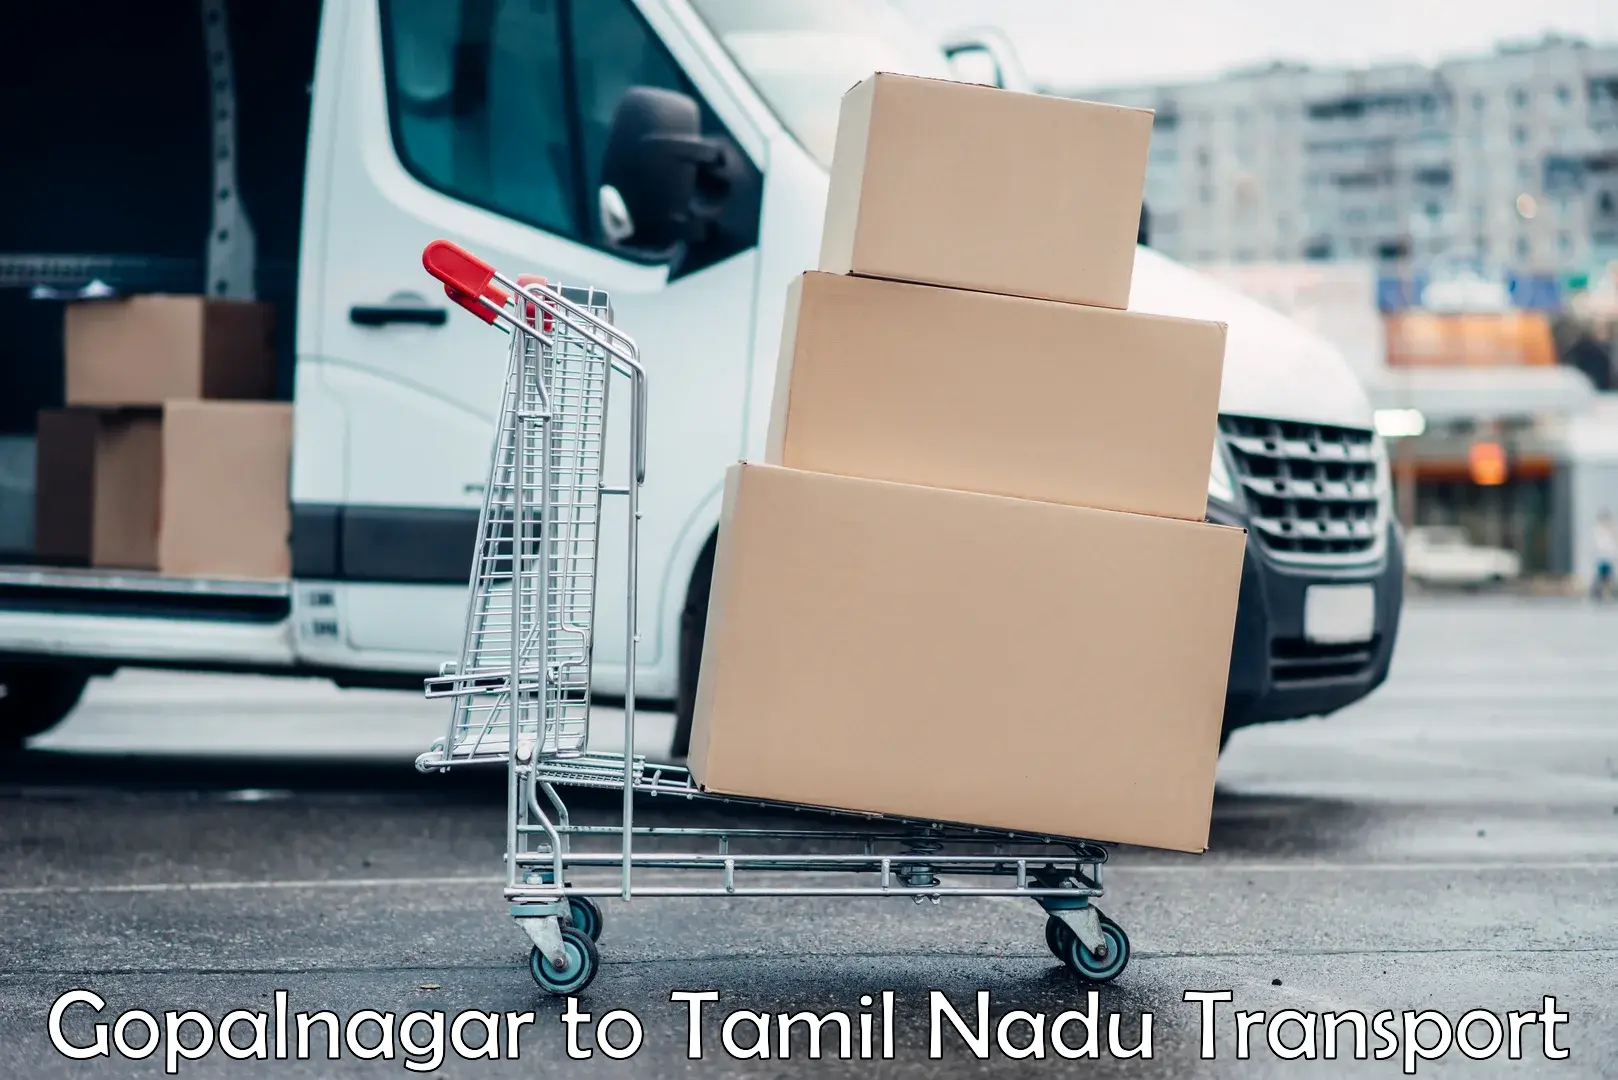 Daily parcel service transport Gopalnagar to Shanmugha Arts Science Technology and Research Academy Thanjavur